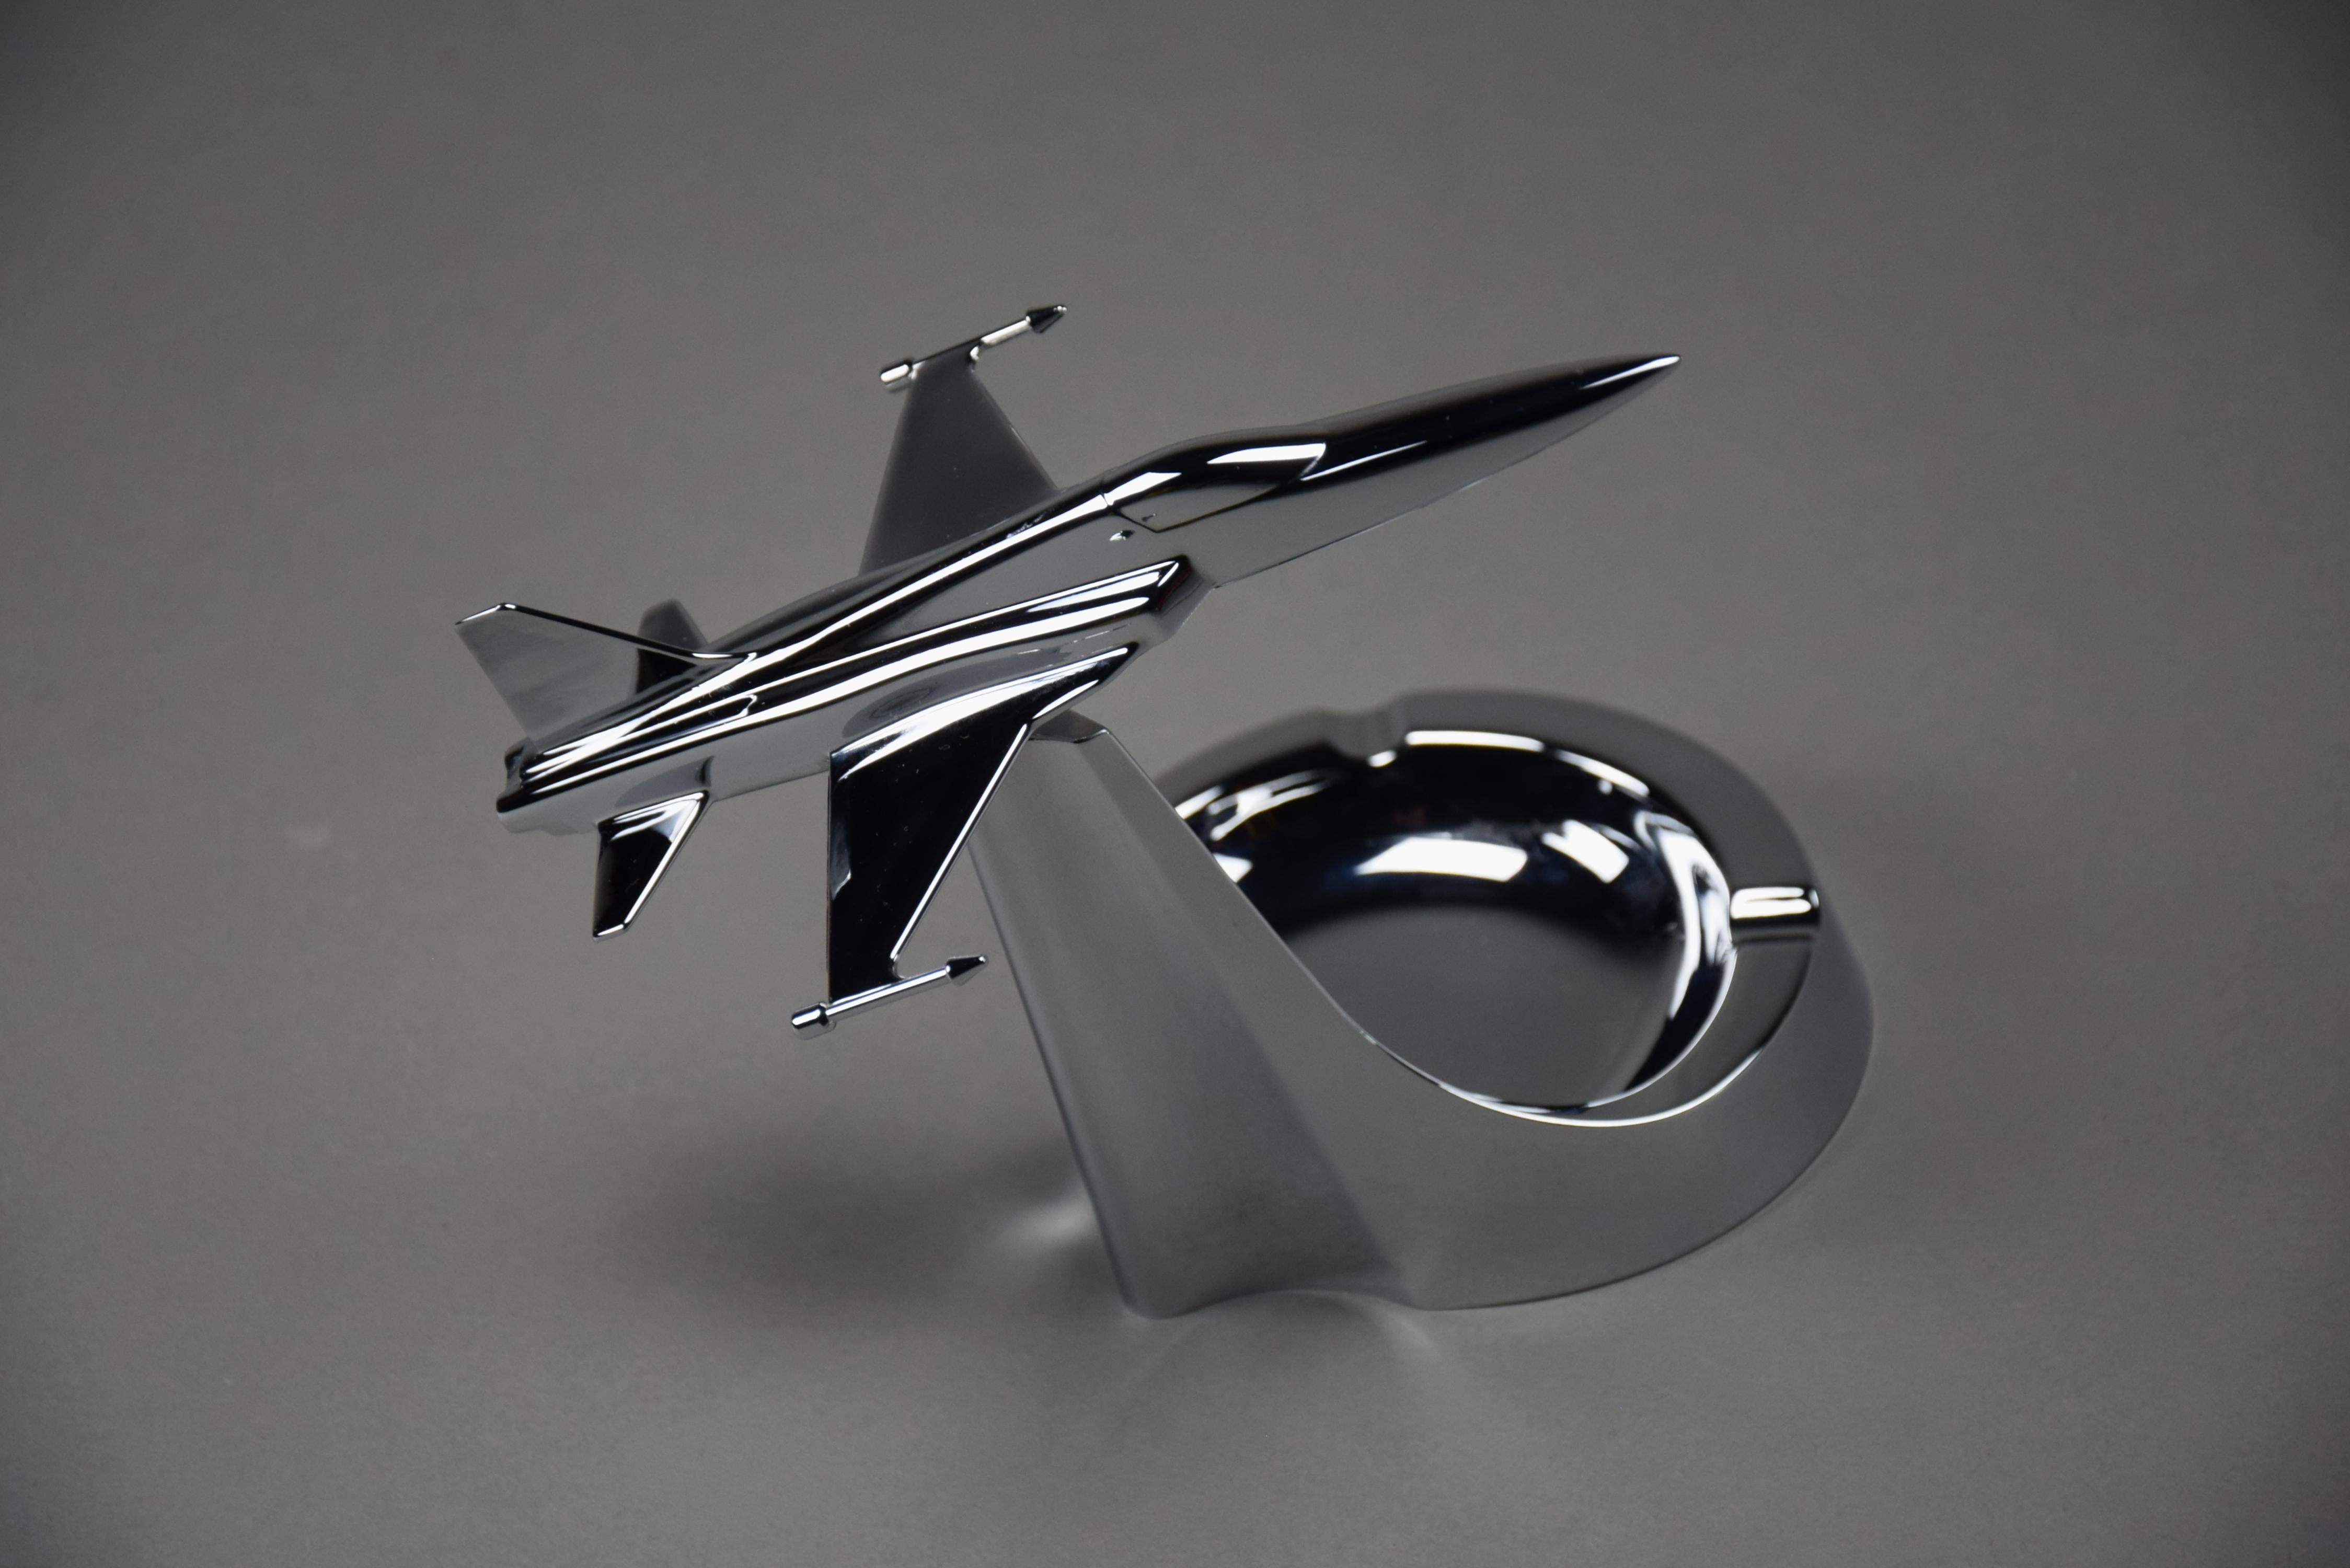 Introducing the ultimate collector's piece for aviation enthusiasts and connoisseurs of fine craftsmanship—the near mint chrome-plated Northrop F-5 Supersonic Fighter Aircraft Promotional Ashtray, meticulously crafted by Buhler in Switzerland during